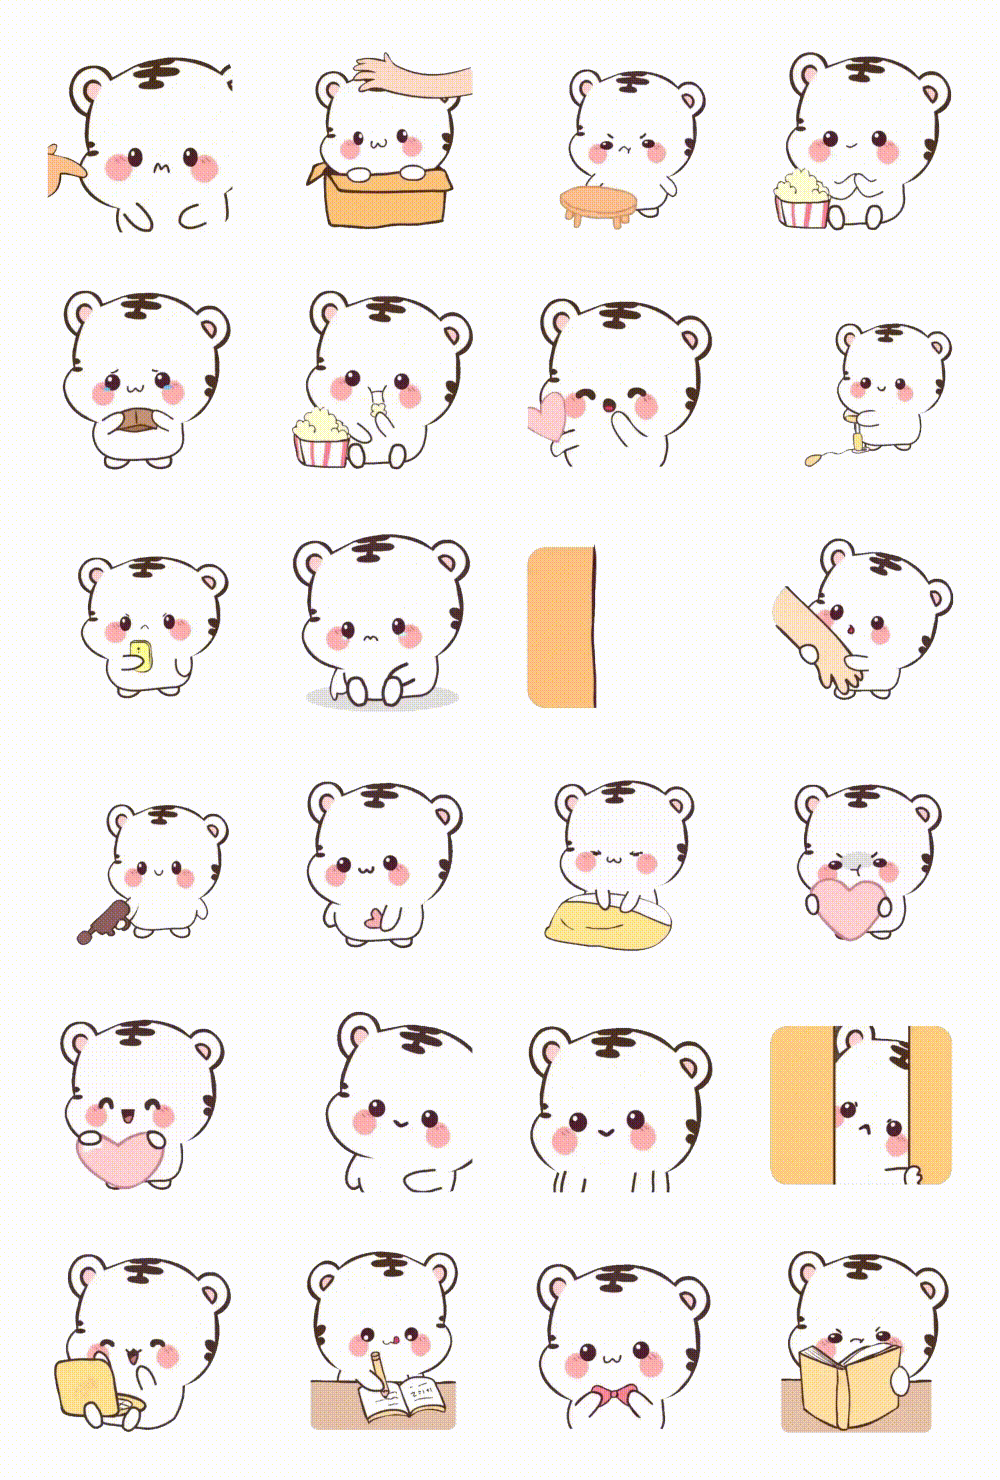 Baby White Tiger Animation/Cartoon,Animals,Celebrity,Gag,People,Phrases,Romance,Sports,Objects,Culture,Plants,Transporations,Instruments,FAMILY,Christmas,Valentine,Easter,Anniversary,Birthday,Vacation,Etc,New year's day sticker pack for Whatsapp, Telegram, Signal, and others chatting and message apps